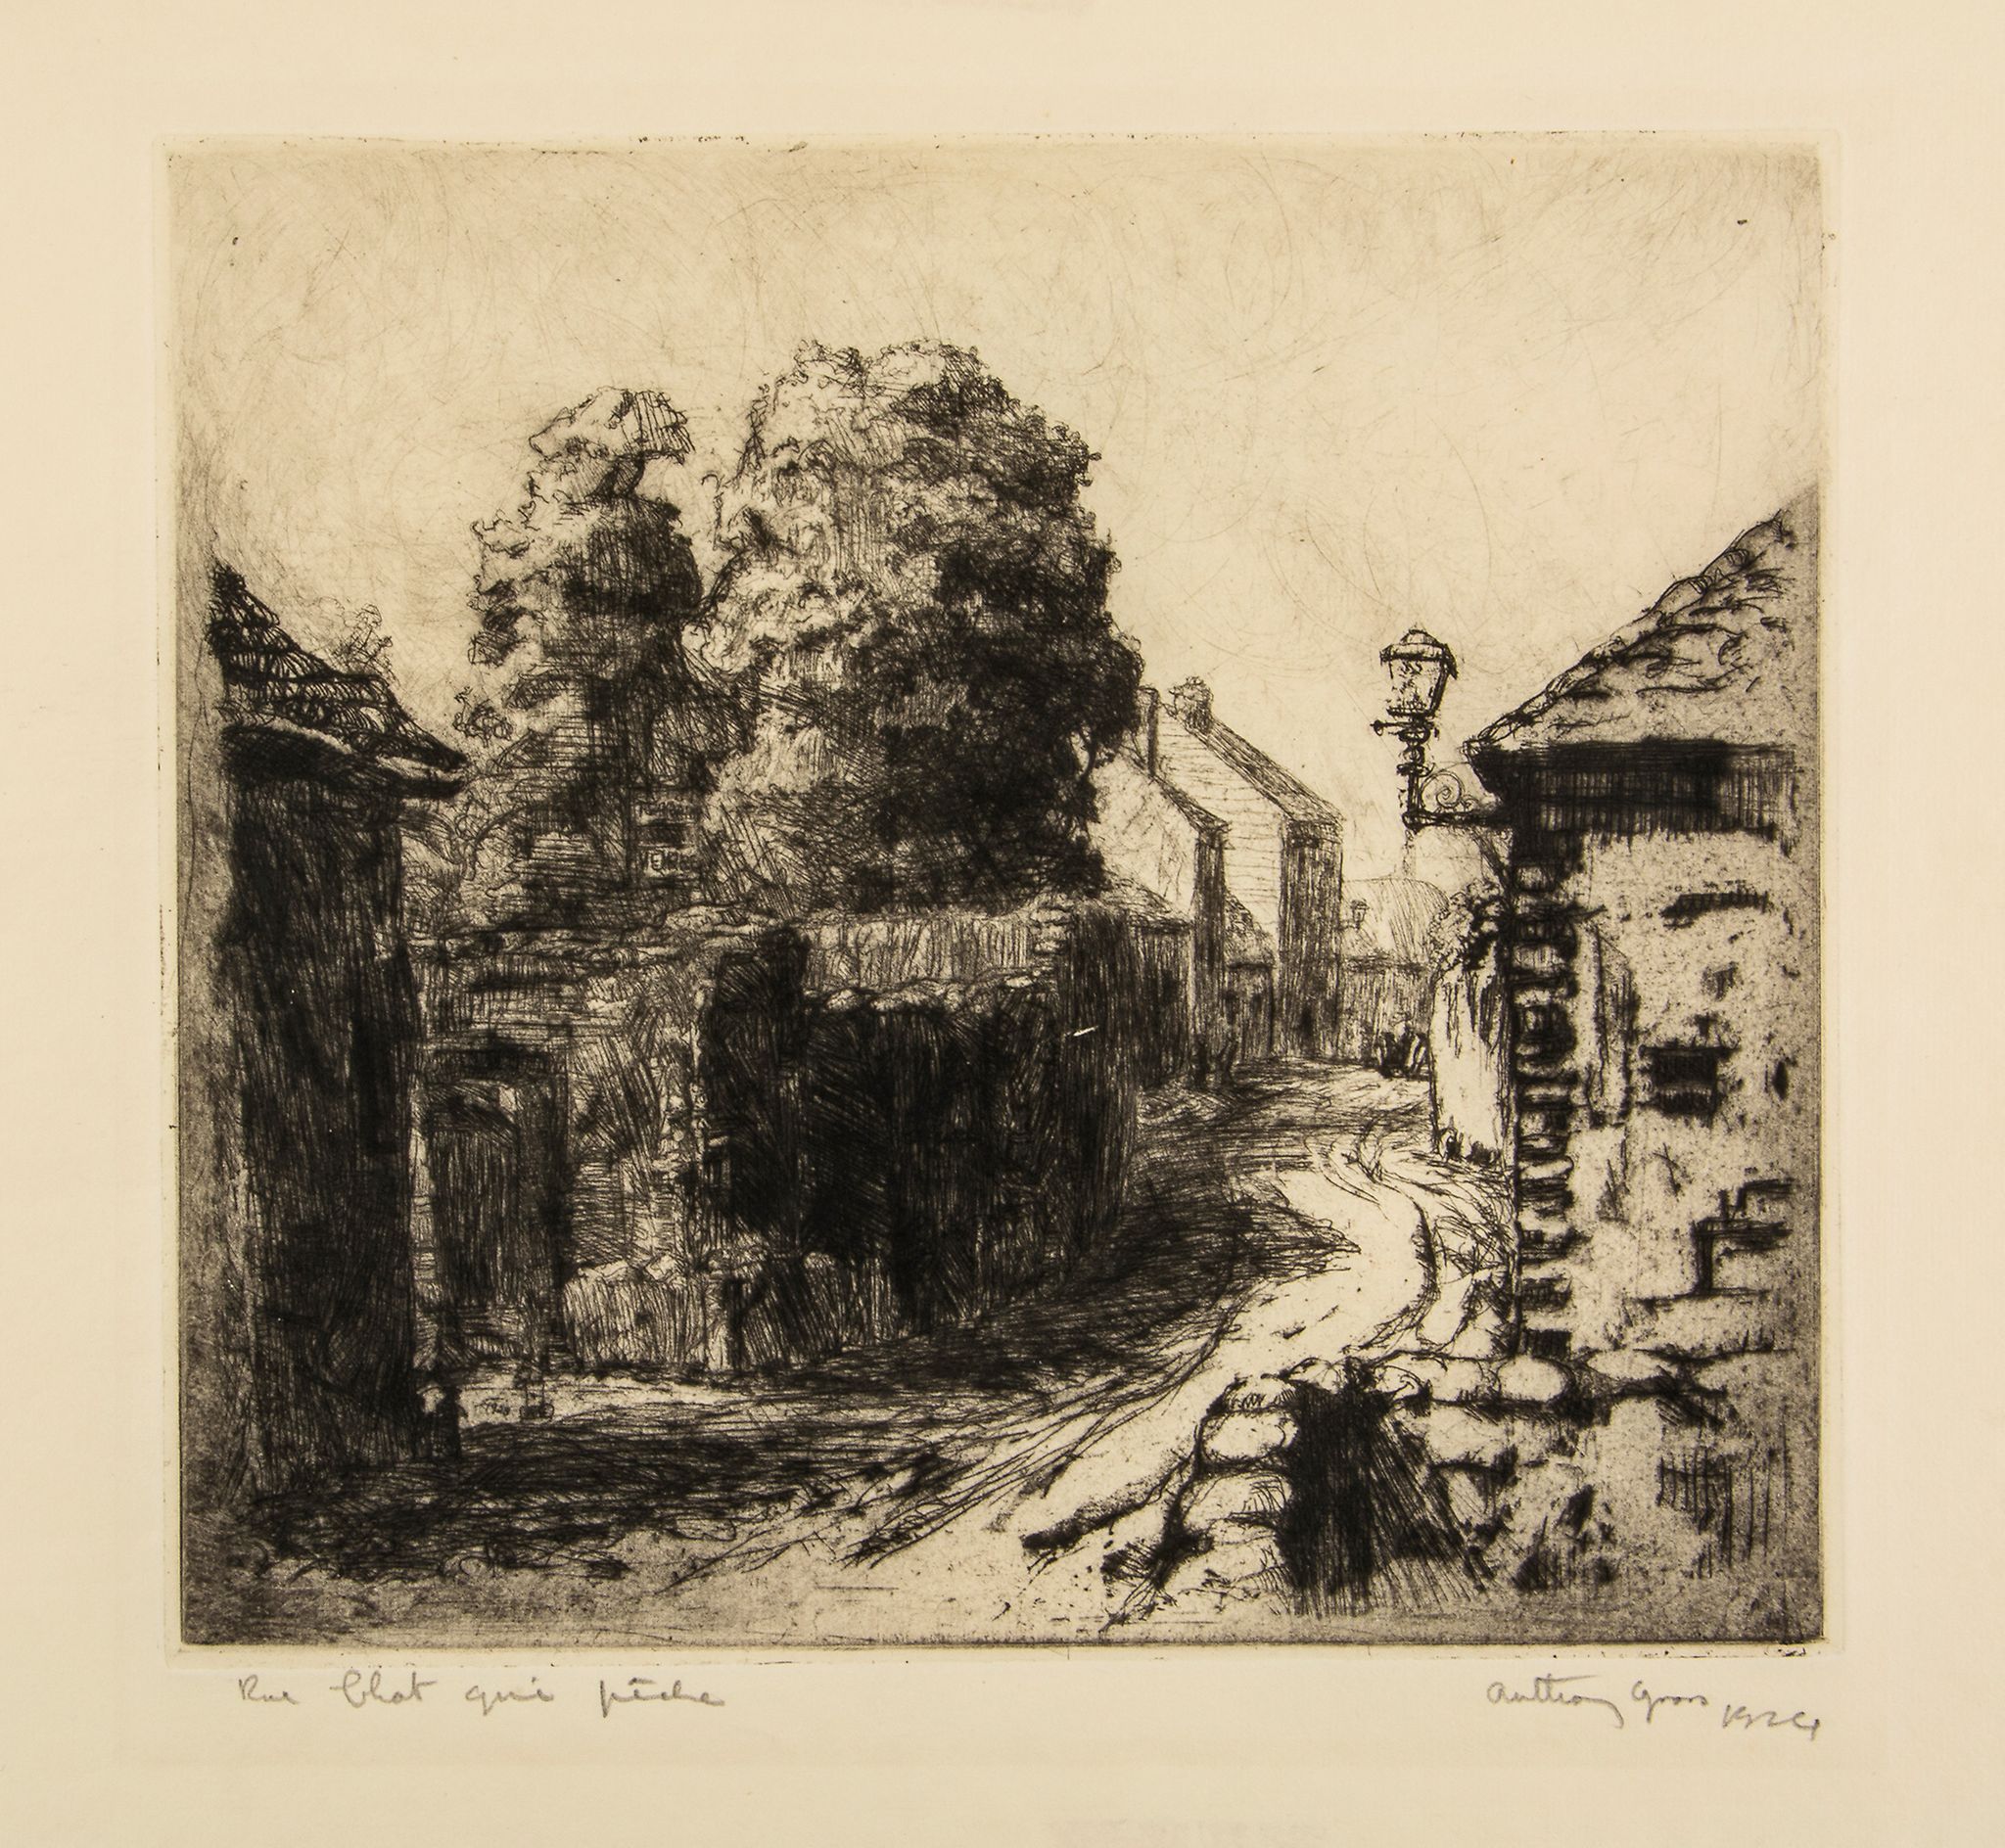 Anthony Gross (1905-1984) - Rue Chat qui Peche etching with drypoint, 1924, signed, titled and dated